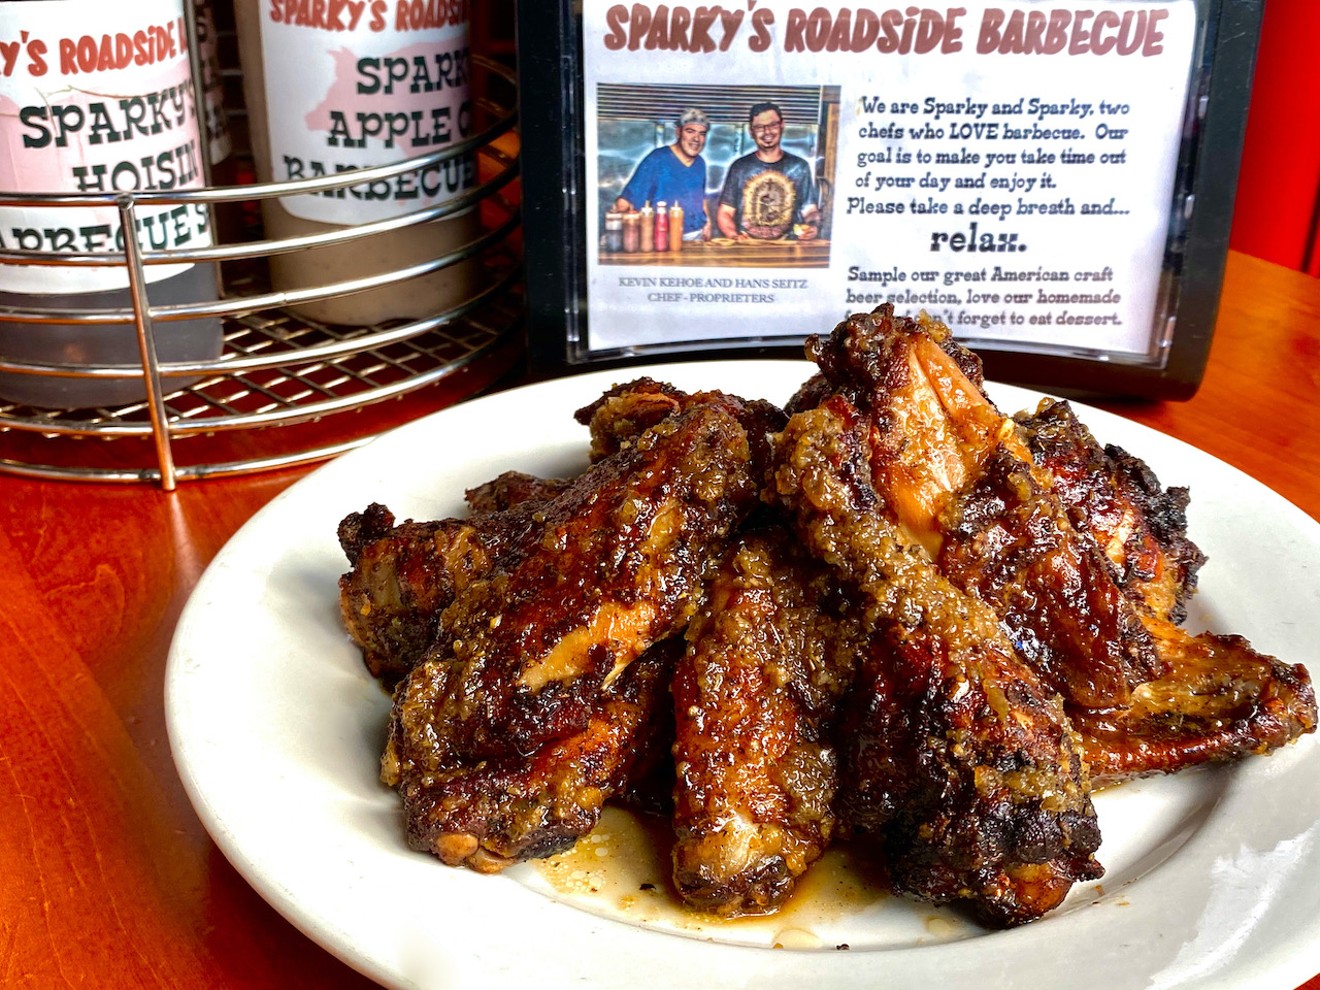 Miami will miss Sparky's chicken wings.